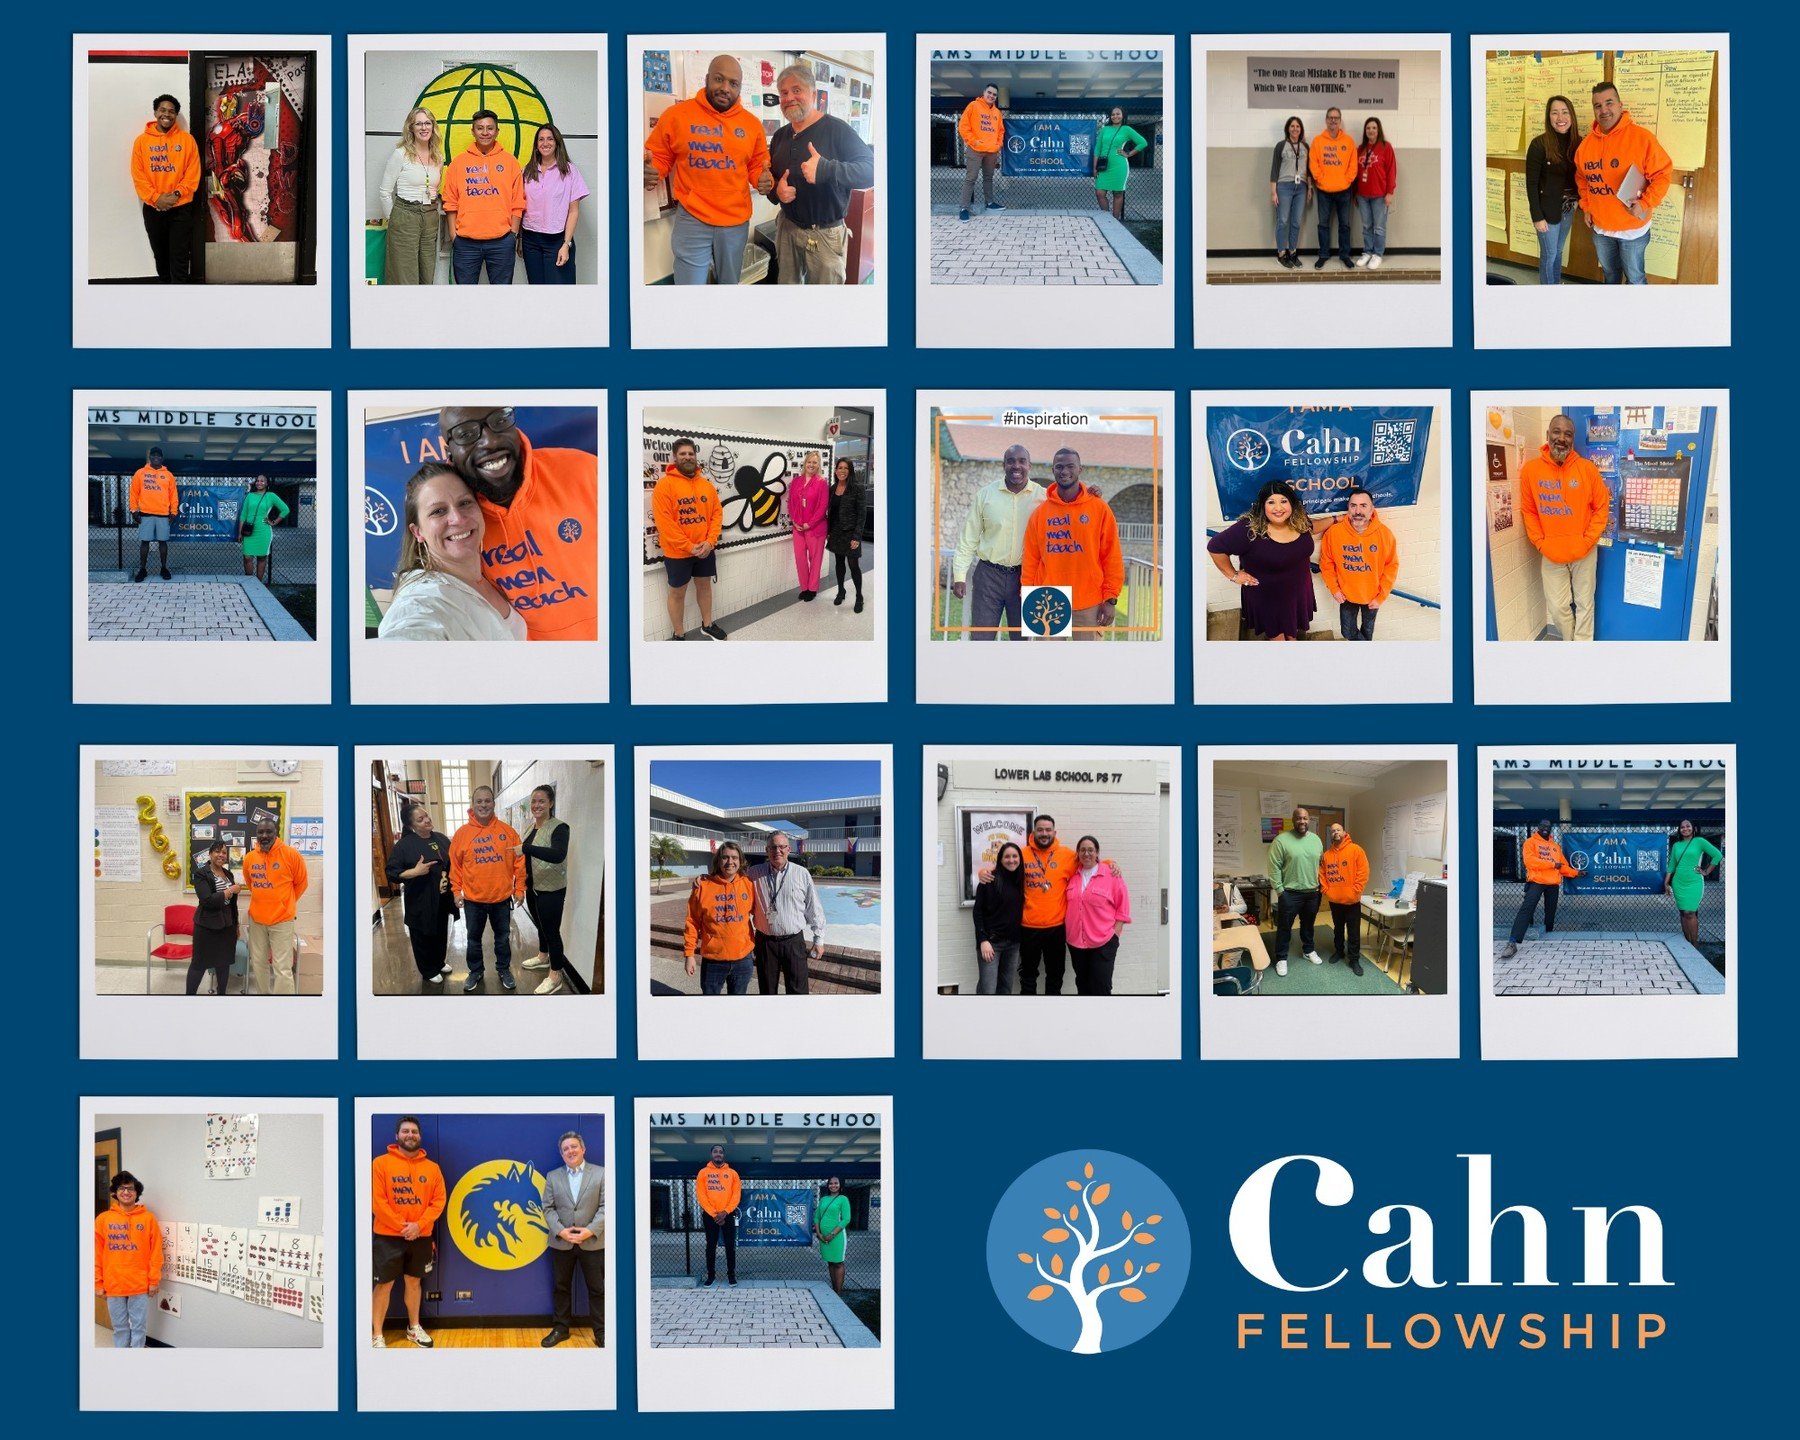 Celebrating Teacher Appreciation Week! A big thank you to our &quot;Real Men Teach&quot; Cahn fellows for sharing your photos. Here's to all the incredible educators making a difference! #TeacherAppreciationWeek @realmenteach